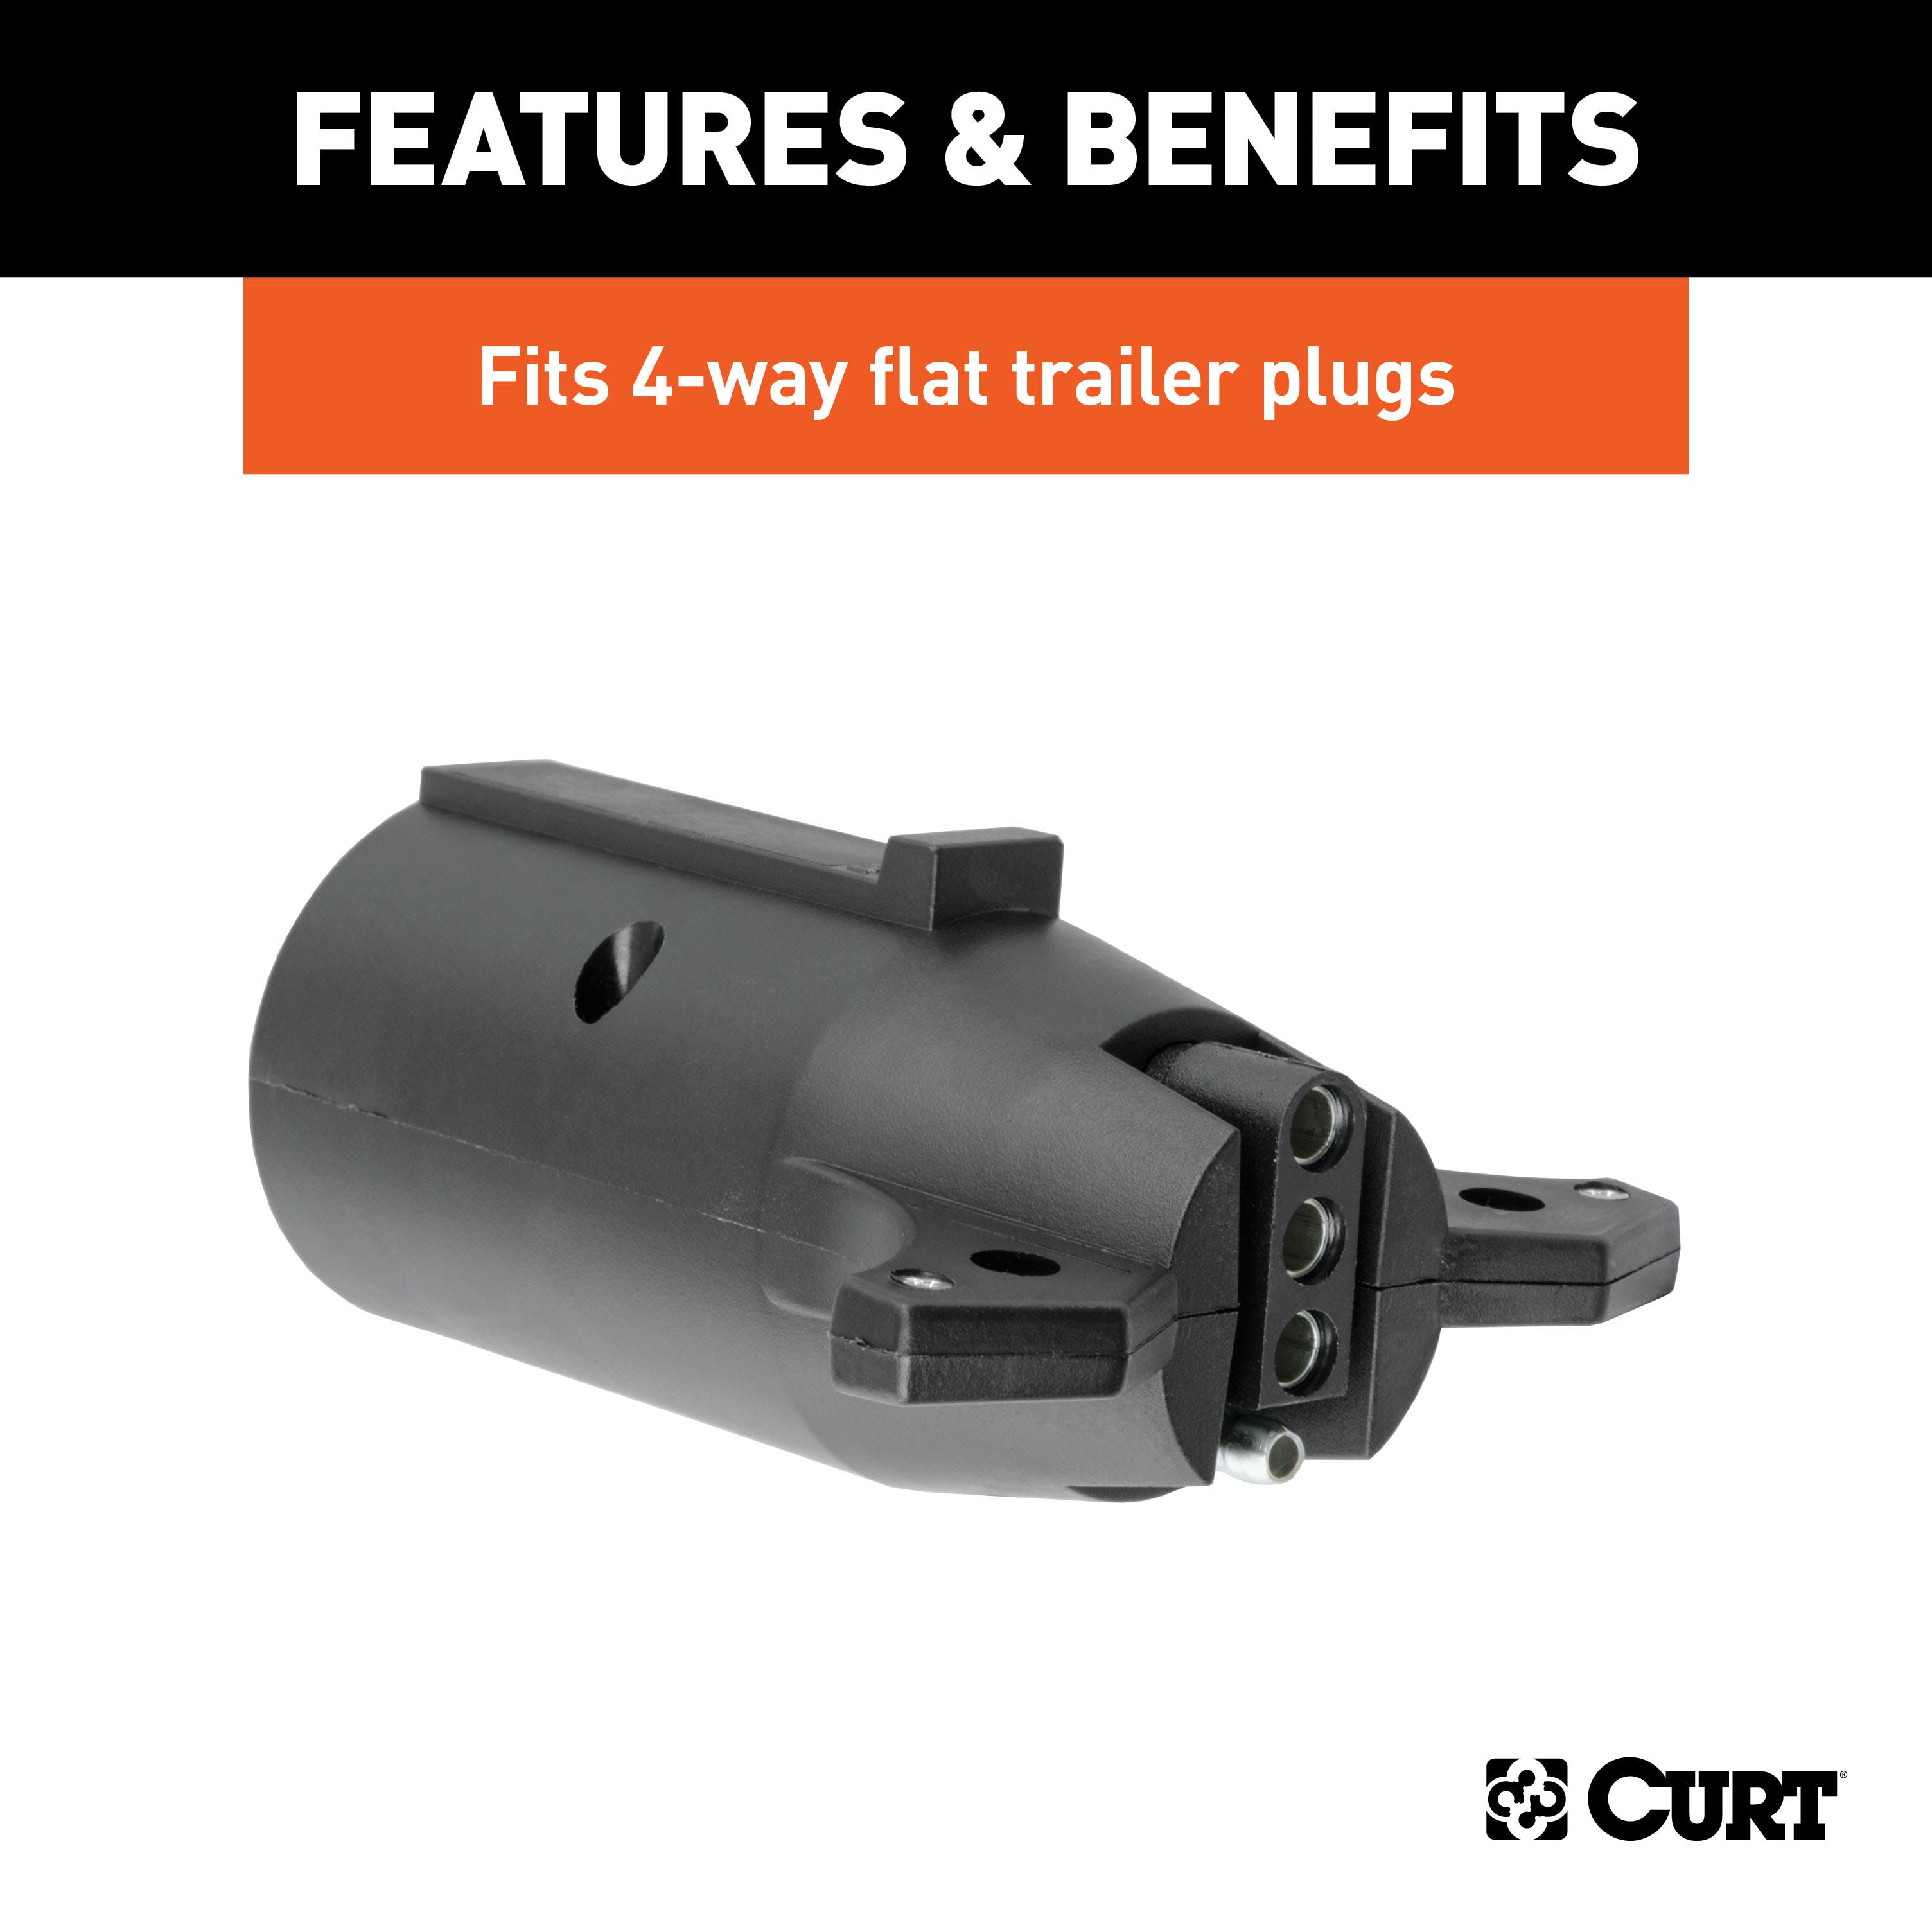 CURT 57240 Electrical Adapter (7-Way RV Blade Vehicle to 4-Way Flat Trailer)